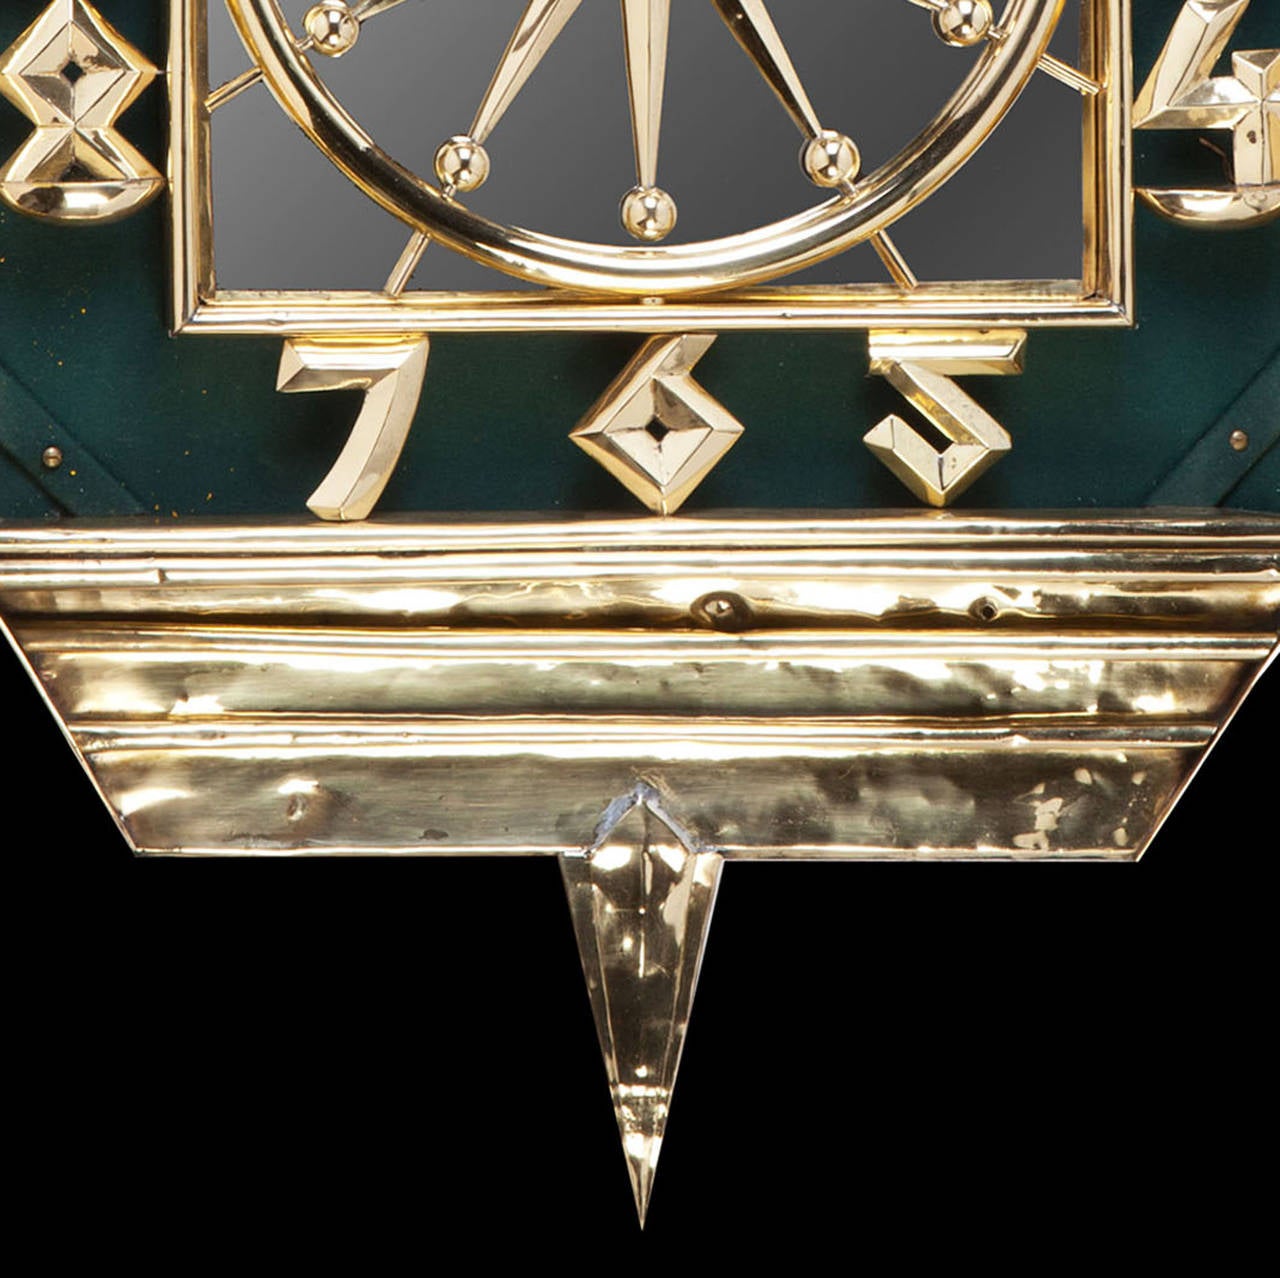 Art Deco Brass and Mirrored Wall Clock In Excellent Condition In London, by appointment only